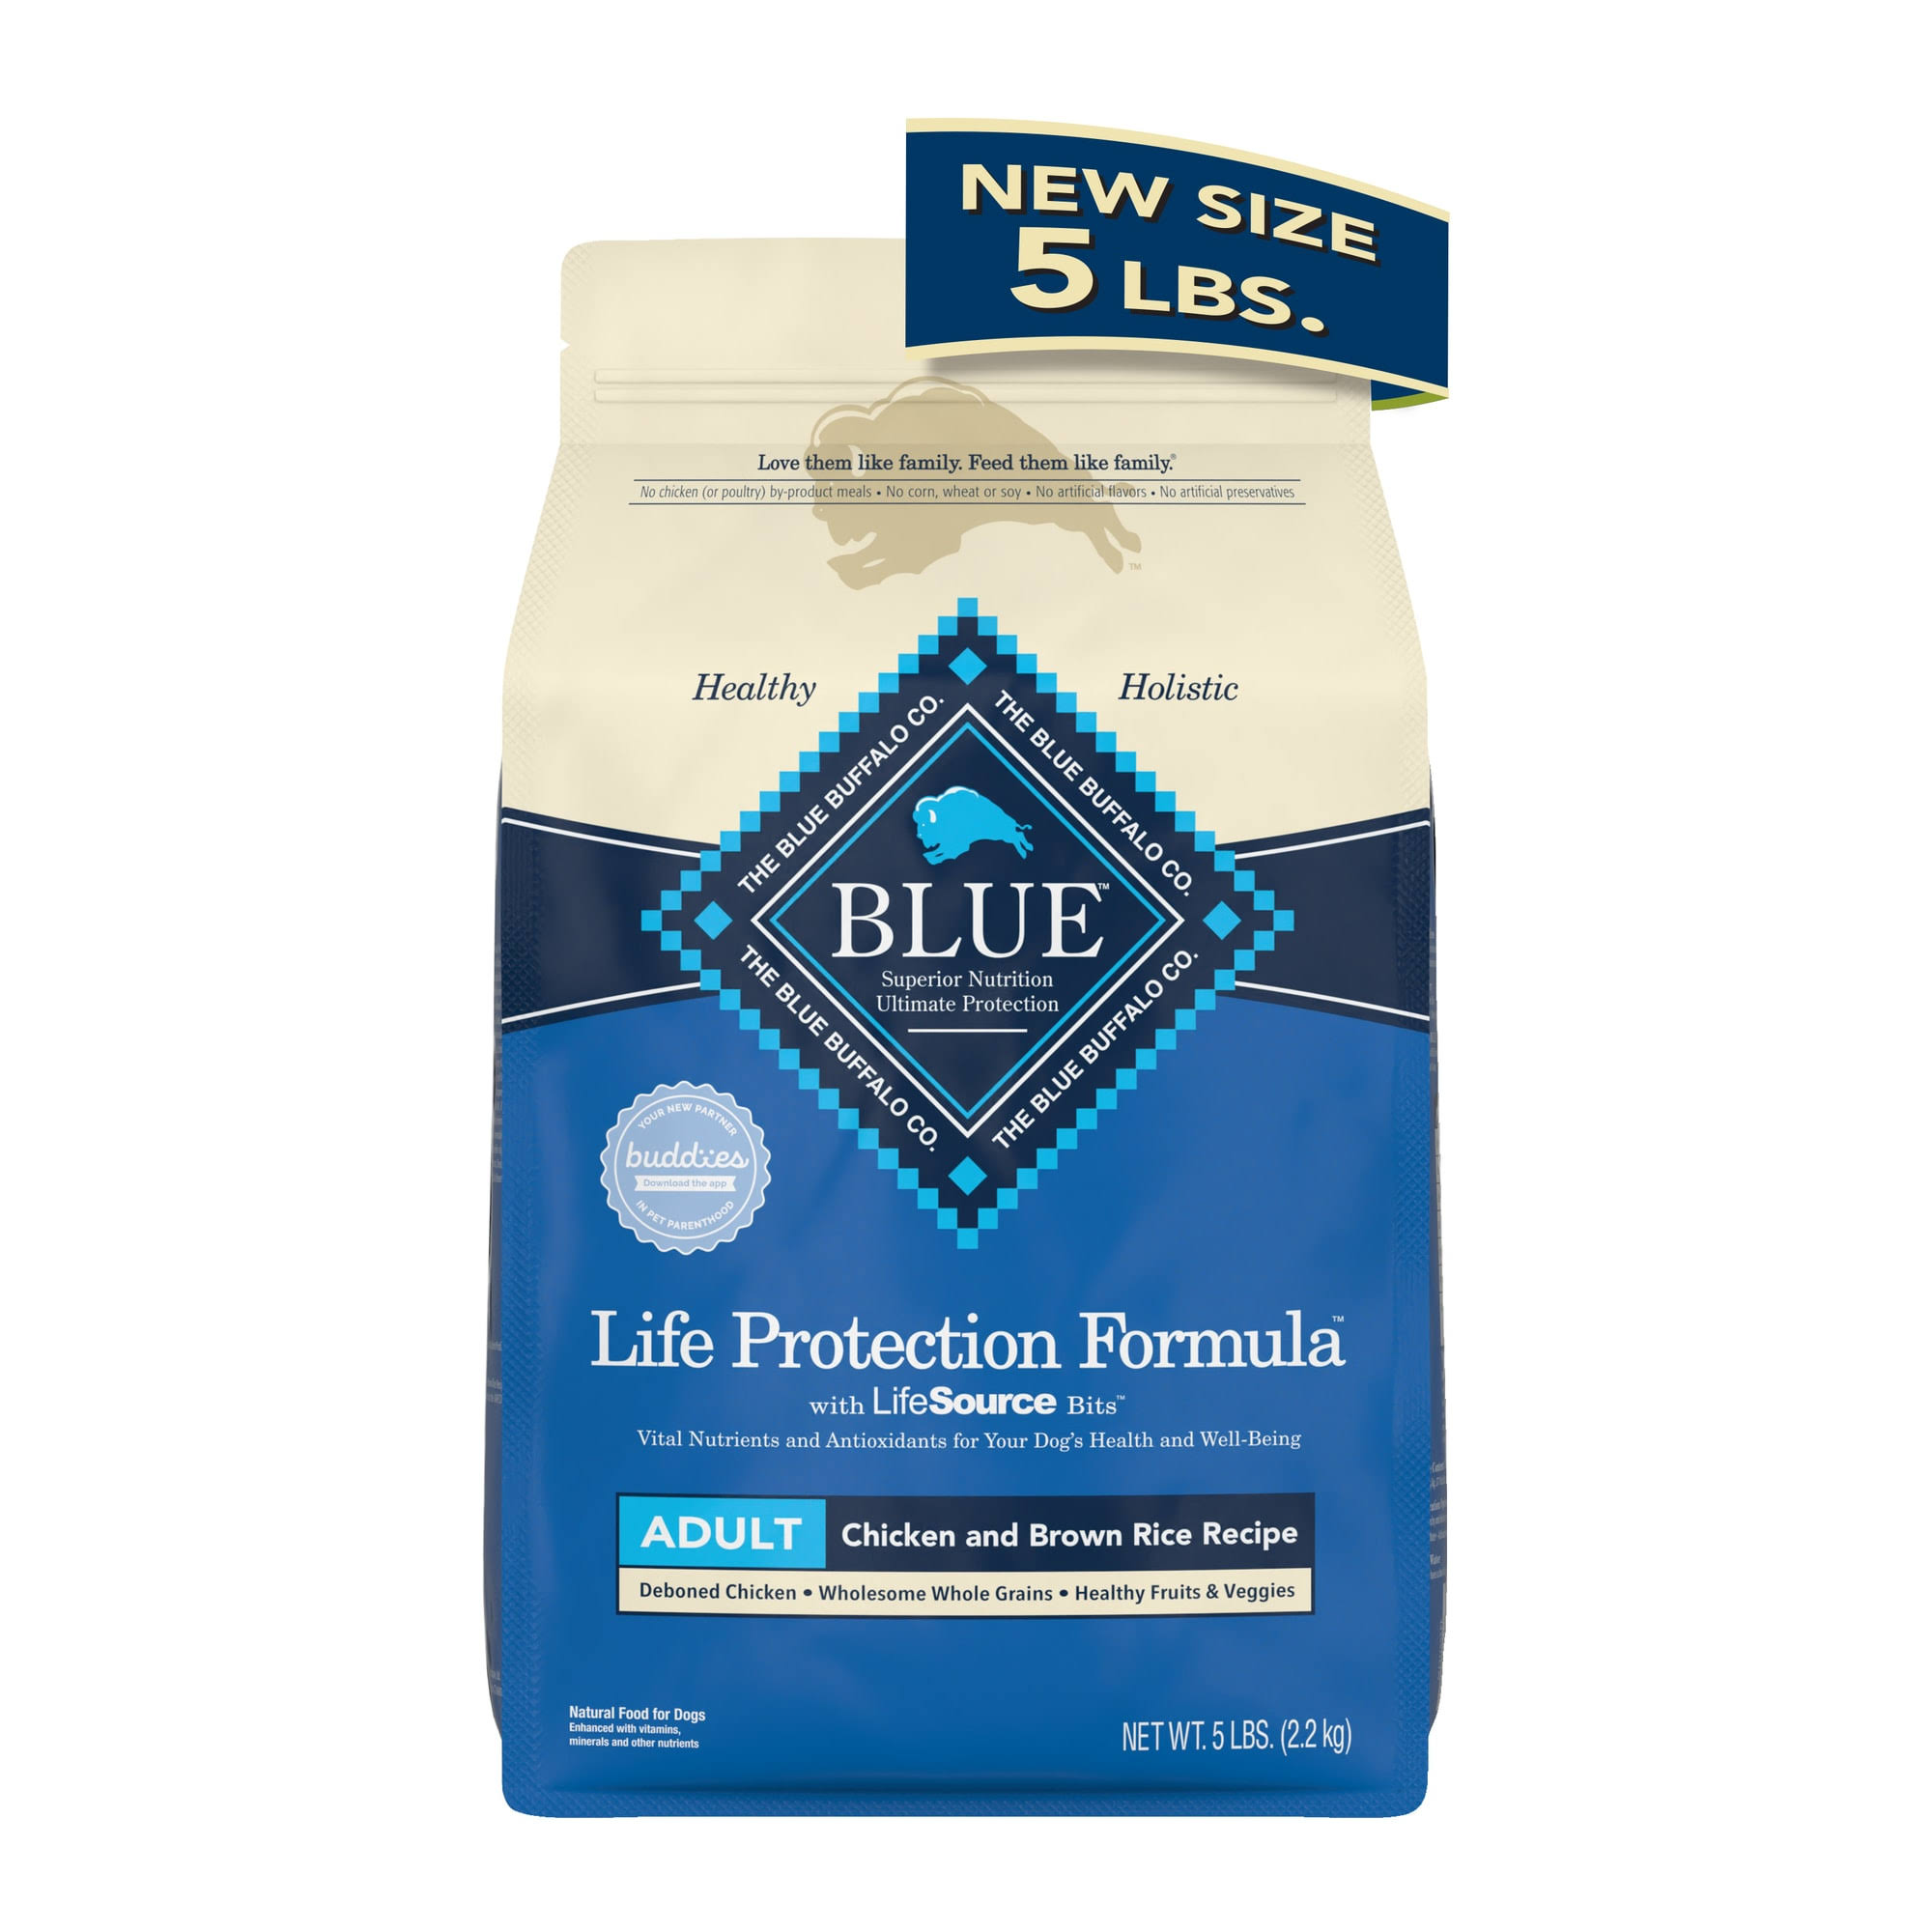 Blue Buffalo Blue Life Protection Formula Dog Food, Chicken and Brown Rice Recipe, Adult - 5 lbs (2.2 kg)